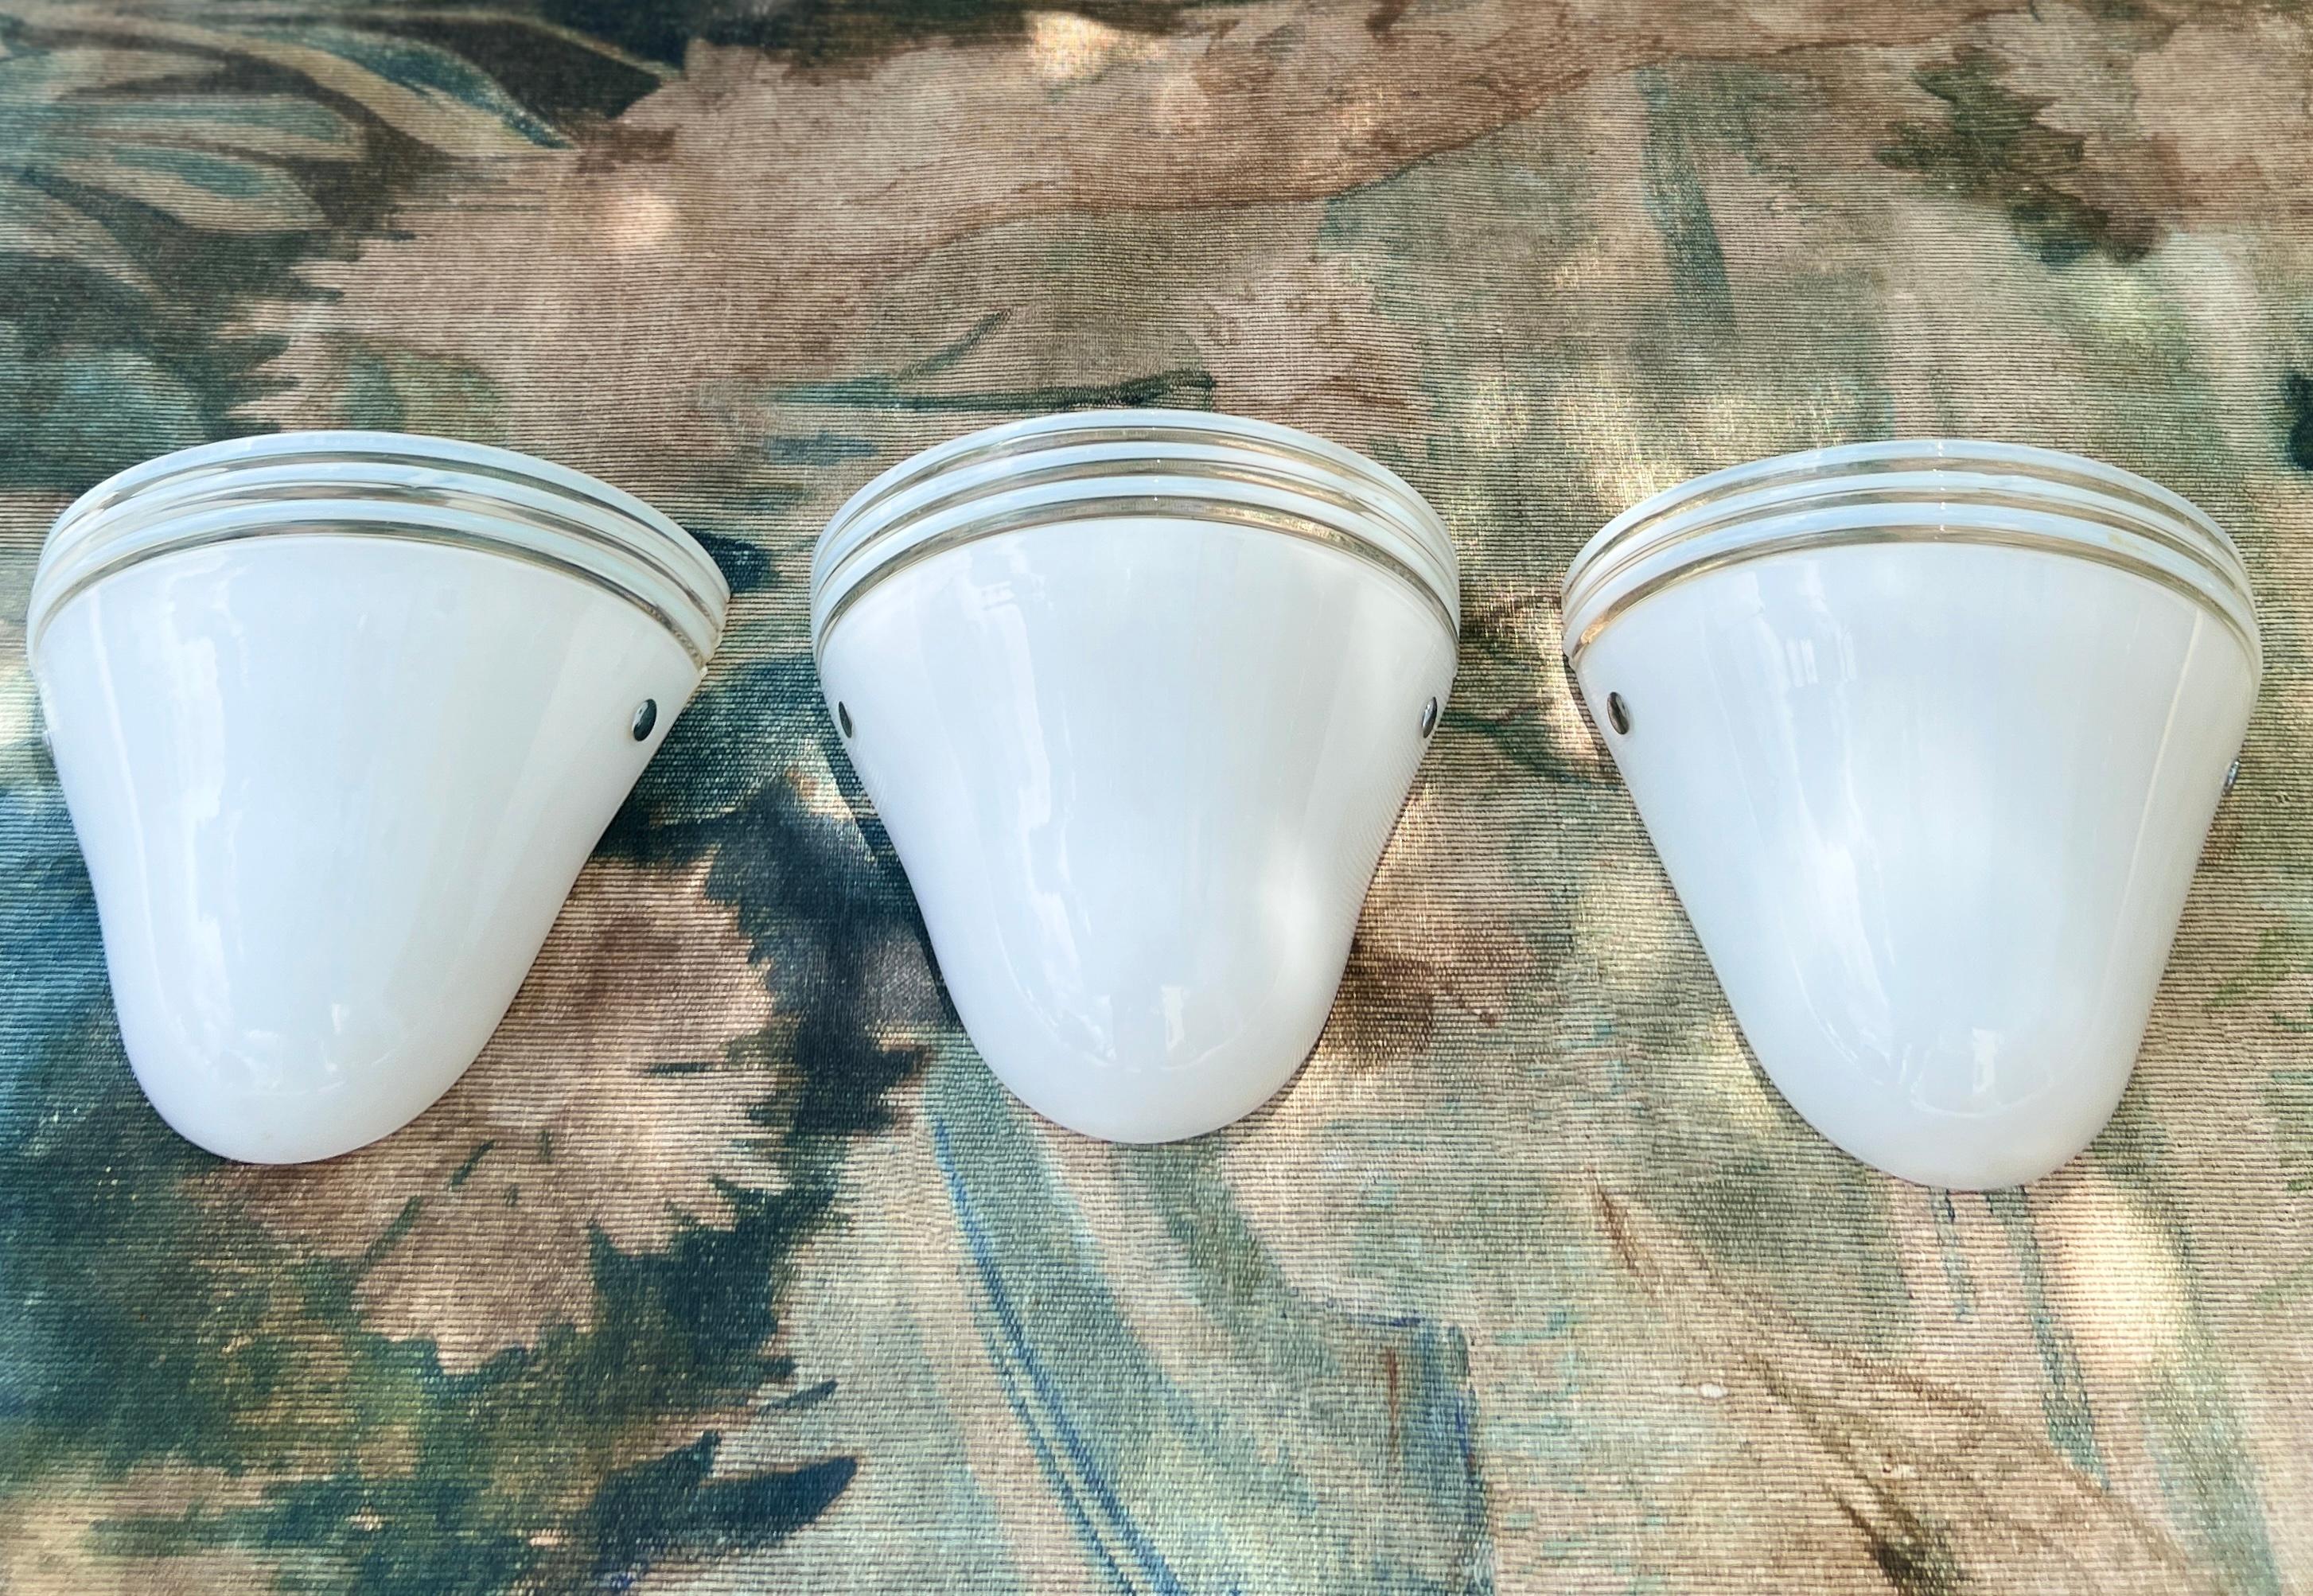 Italian Set/Three Mid-Century Modern White Murano Glass Sconces by Leucos, Italy c. 1975 For Sale